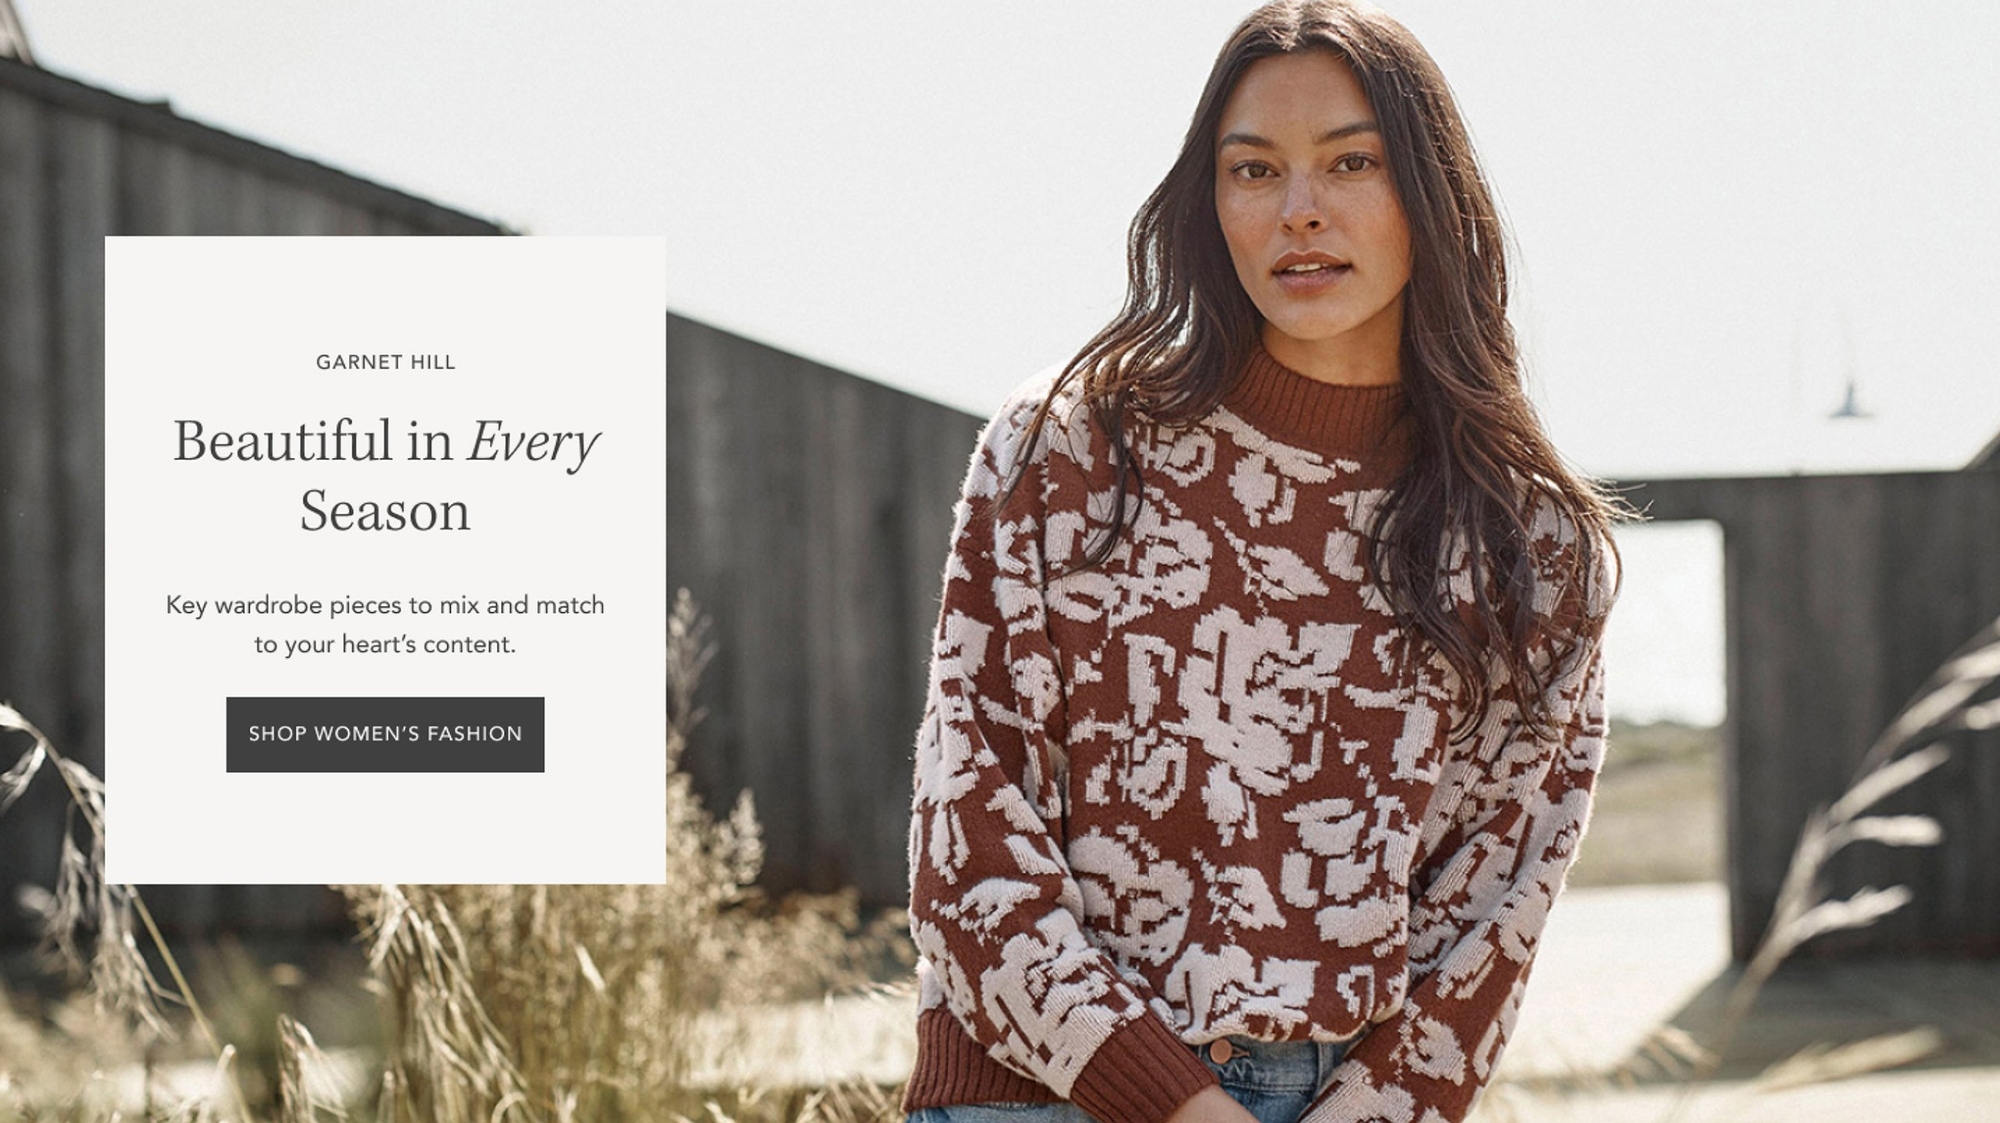 Garnet Hill website hero banner with woman modeling a sweater, text overlay in a white box